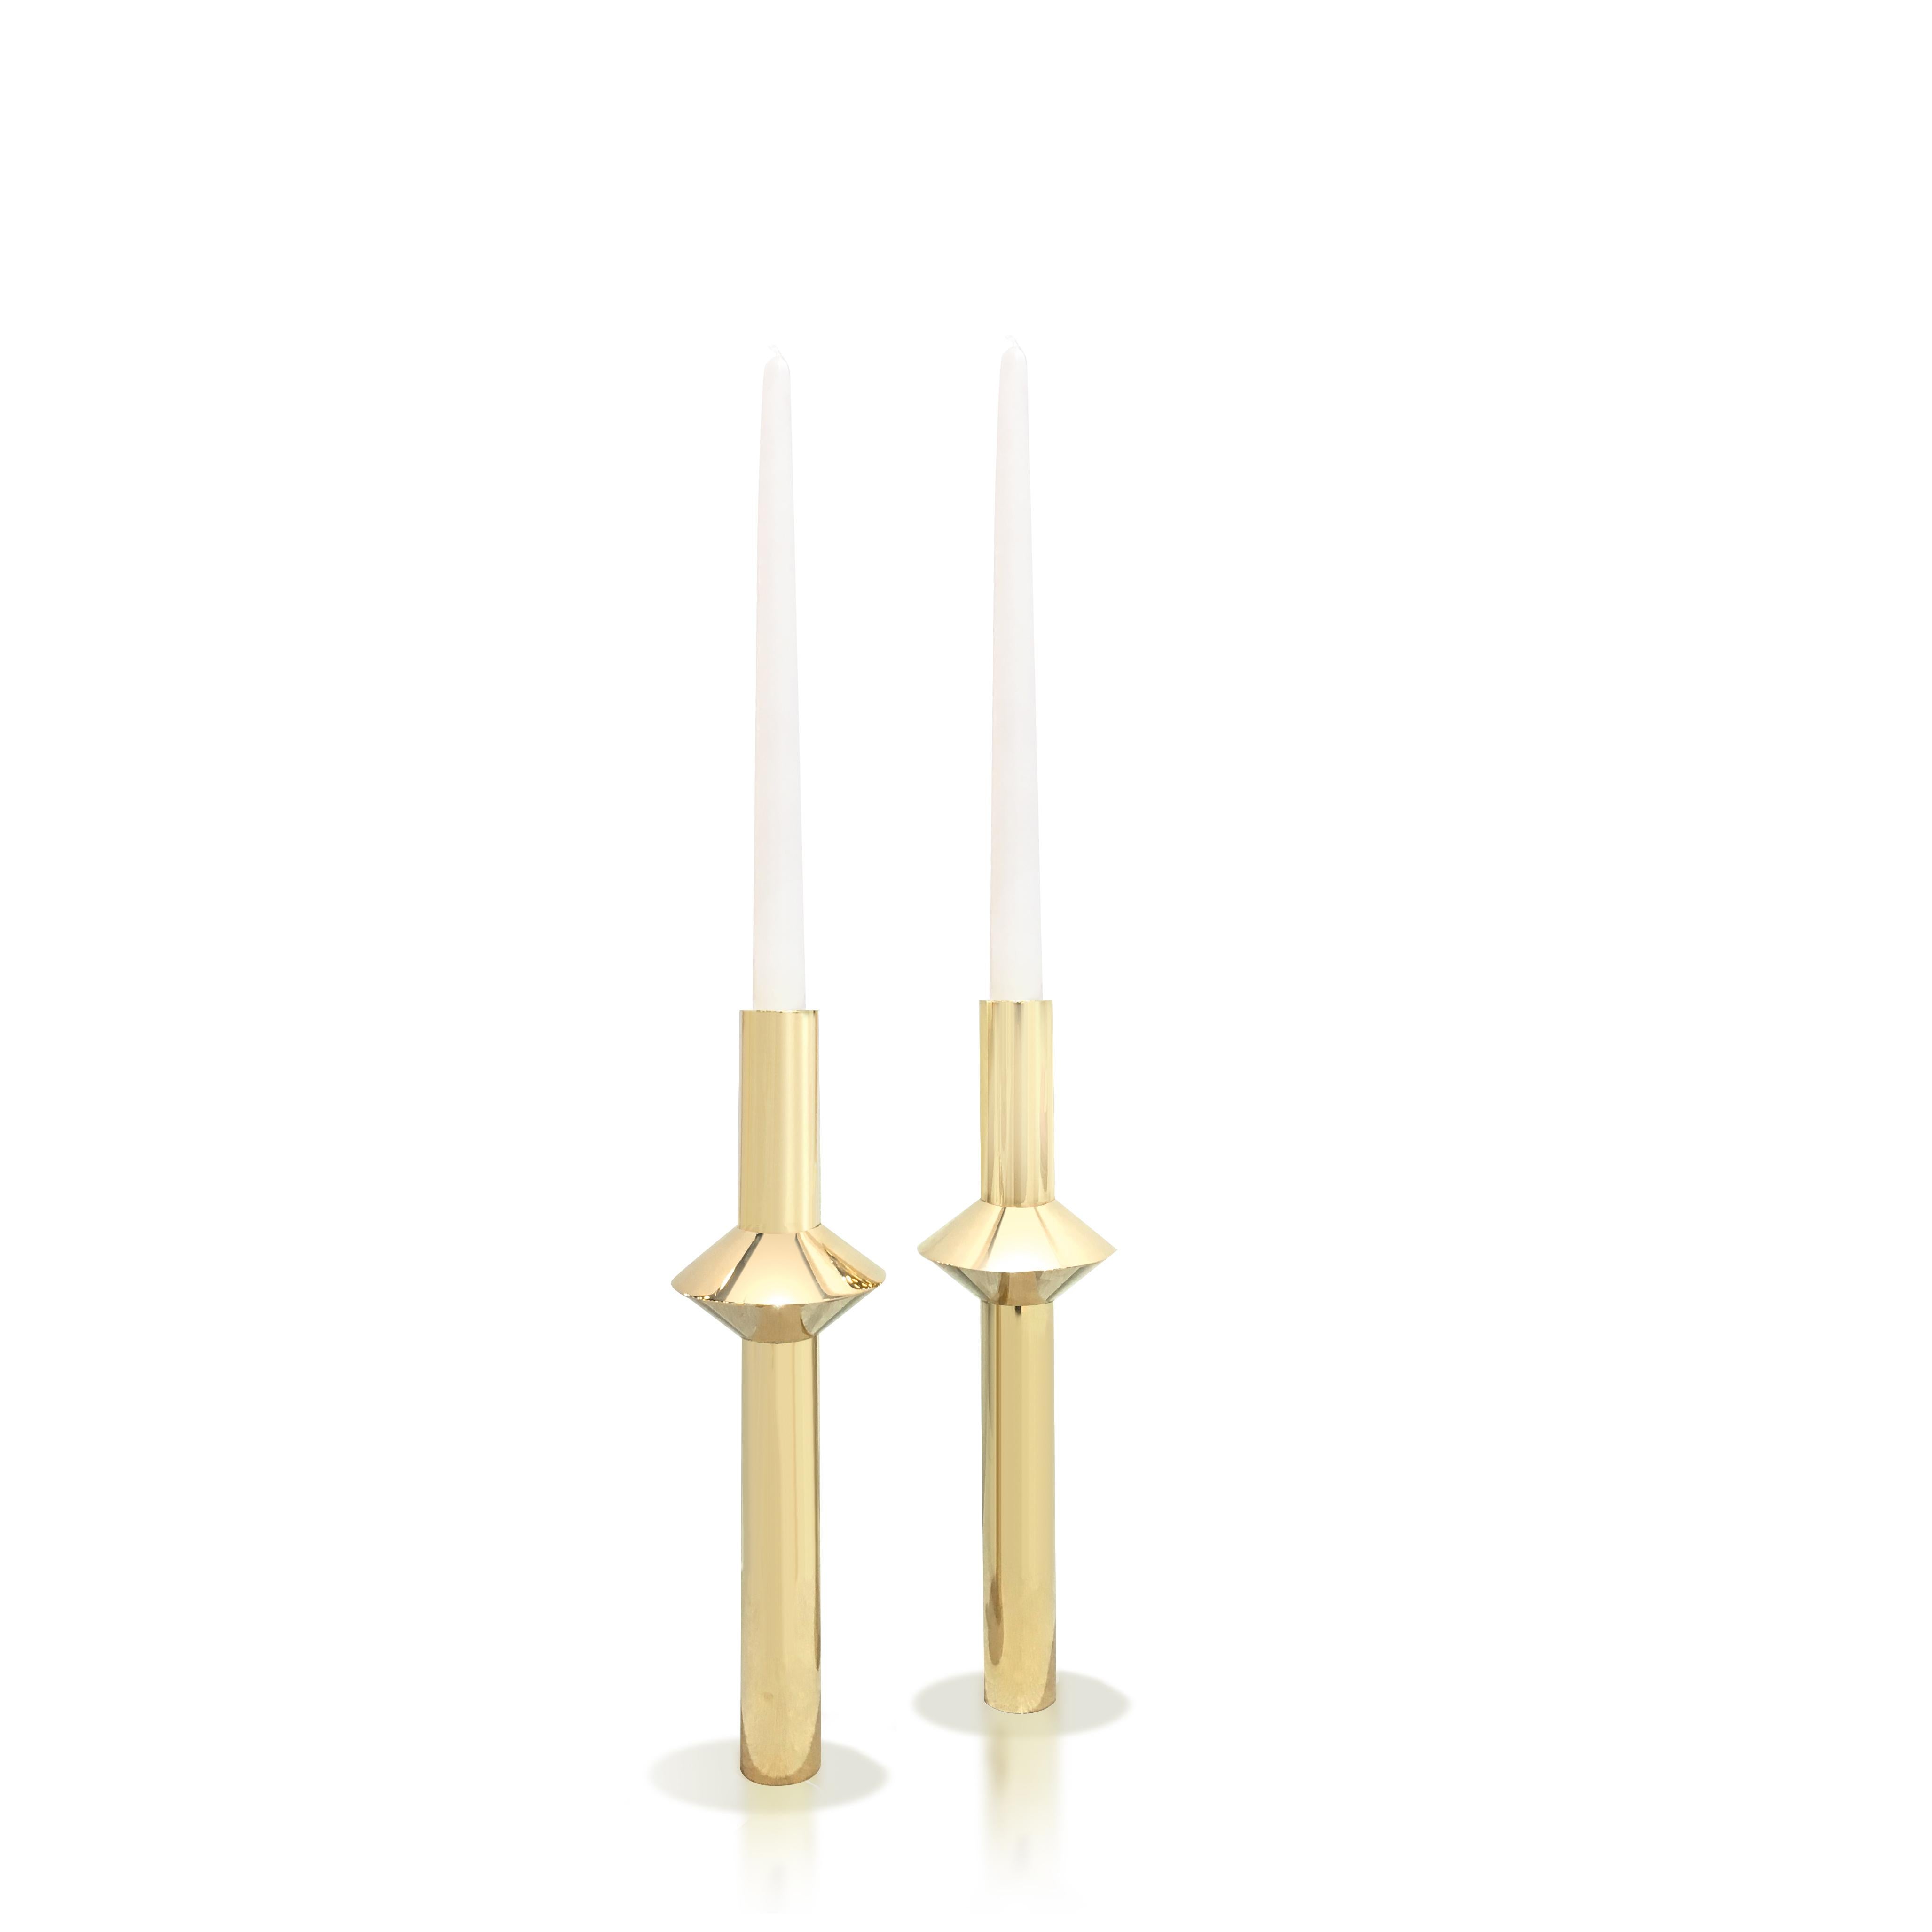 Turned Contemporary Solid Swedish Brass Modern Minimalist Candlesticks For Sale